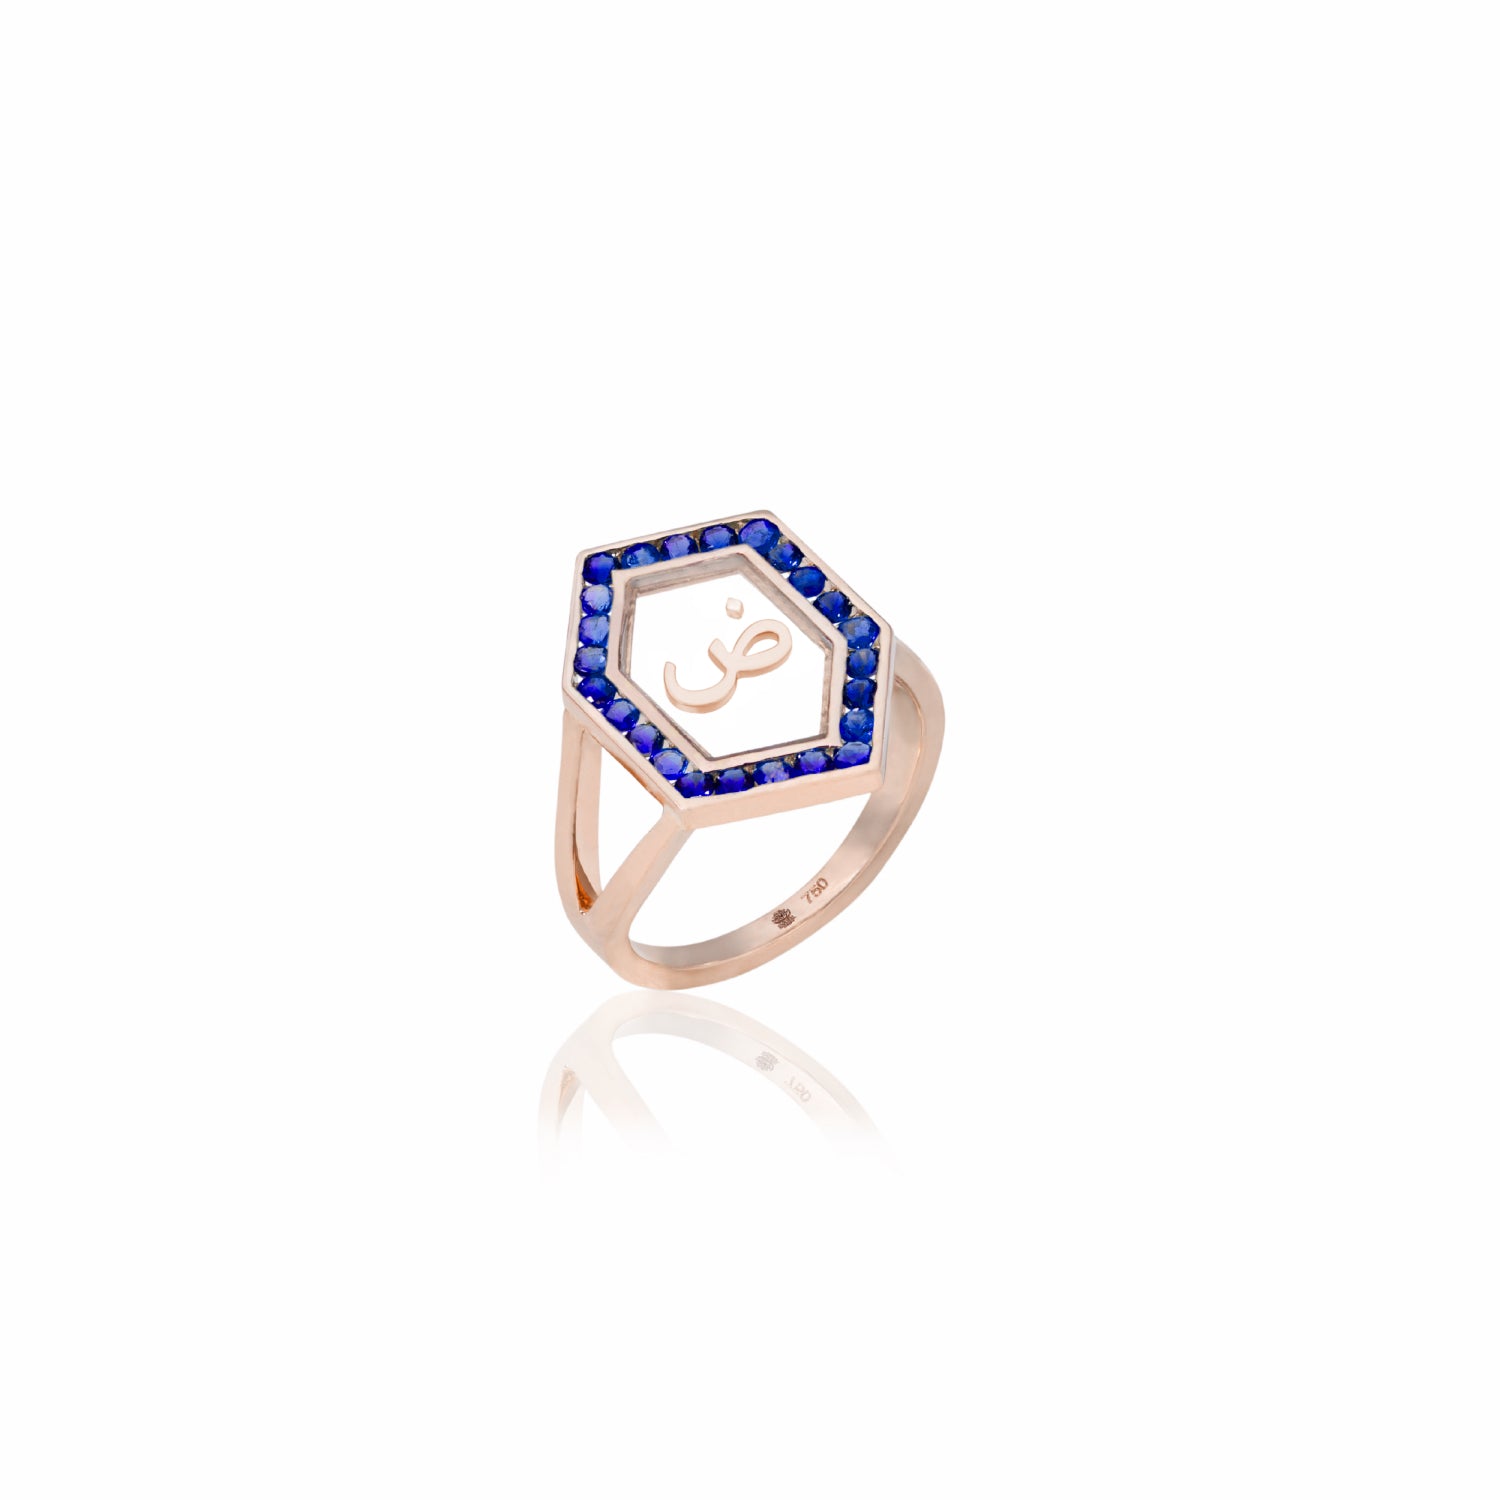 Qamoos 1.0 Letter ض Sapphire Ring in Rose Gold